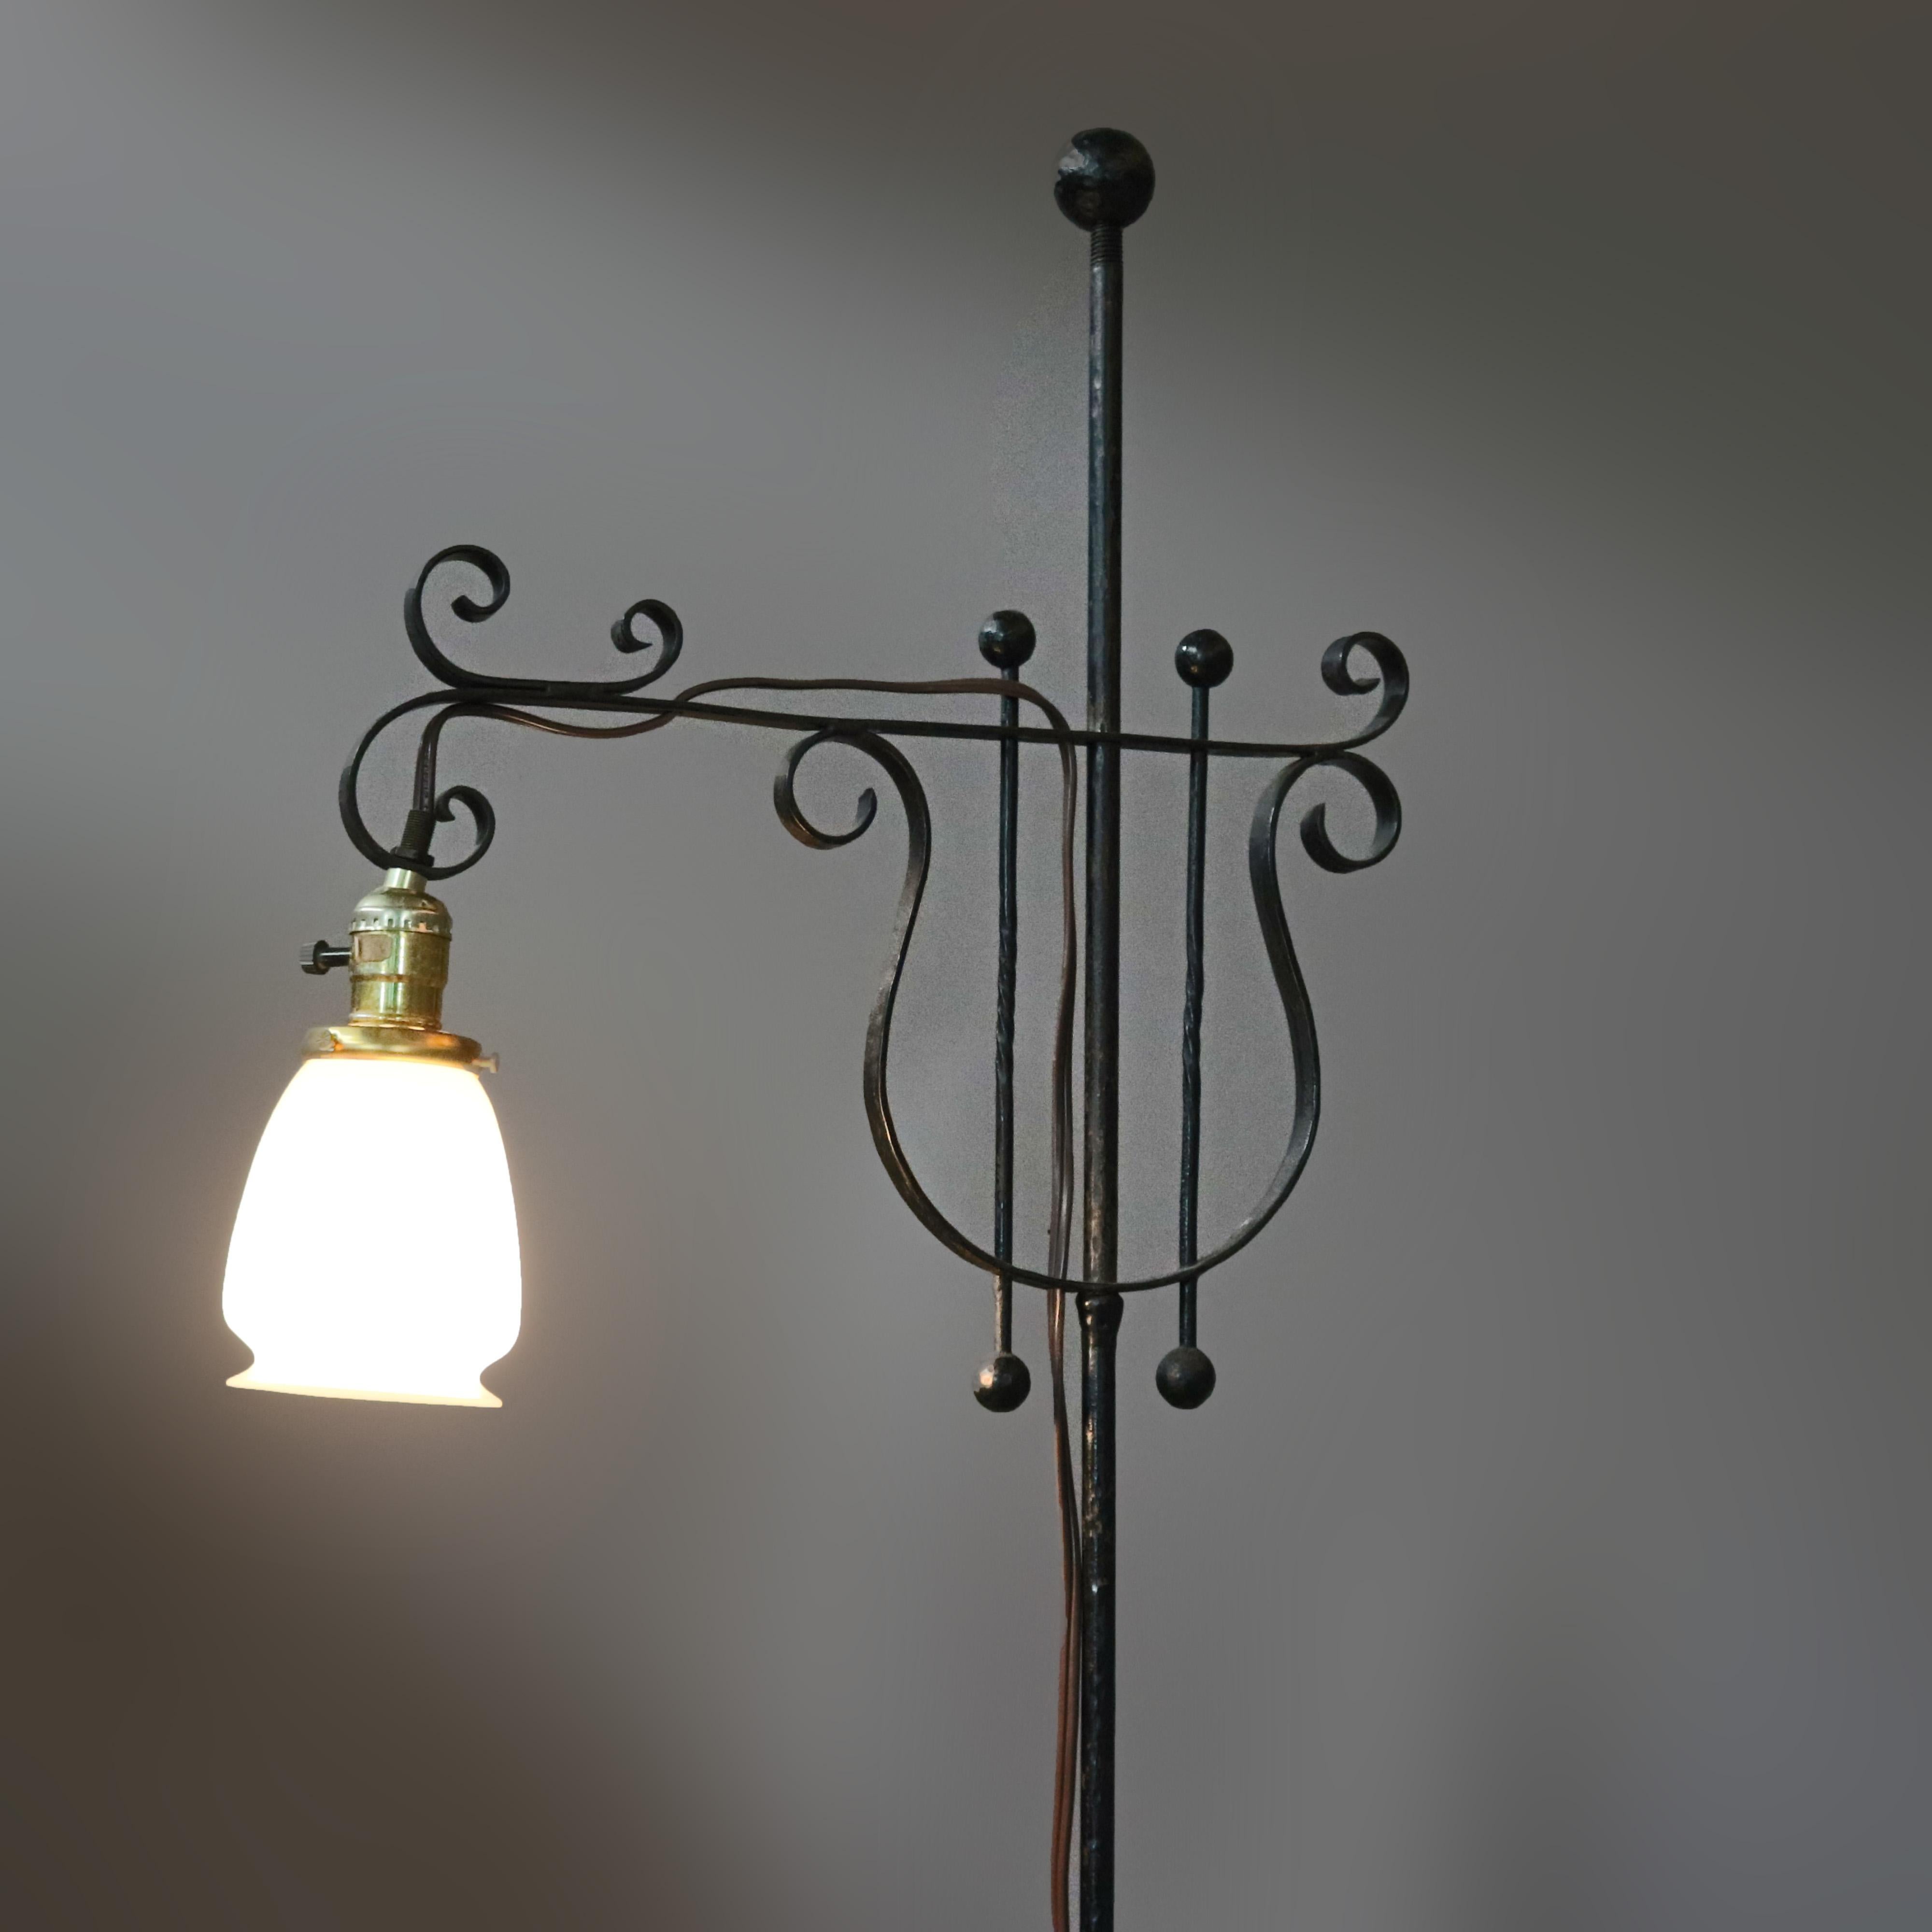 An antique gooseneck floor lamp offers wrought iron construction with lyre form frame with scroll elements throughout, art glass shade, circa 1920.

Measures: 66.5